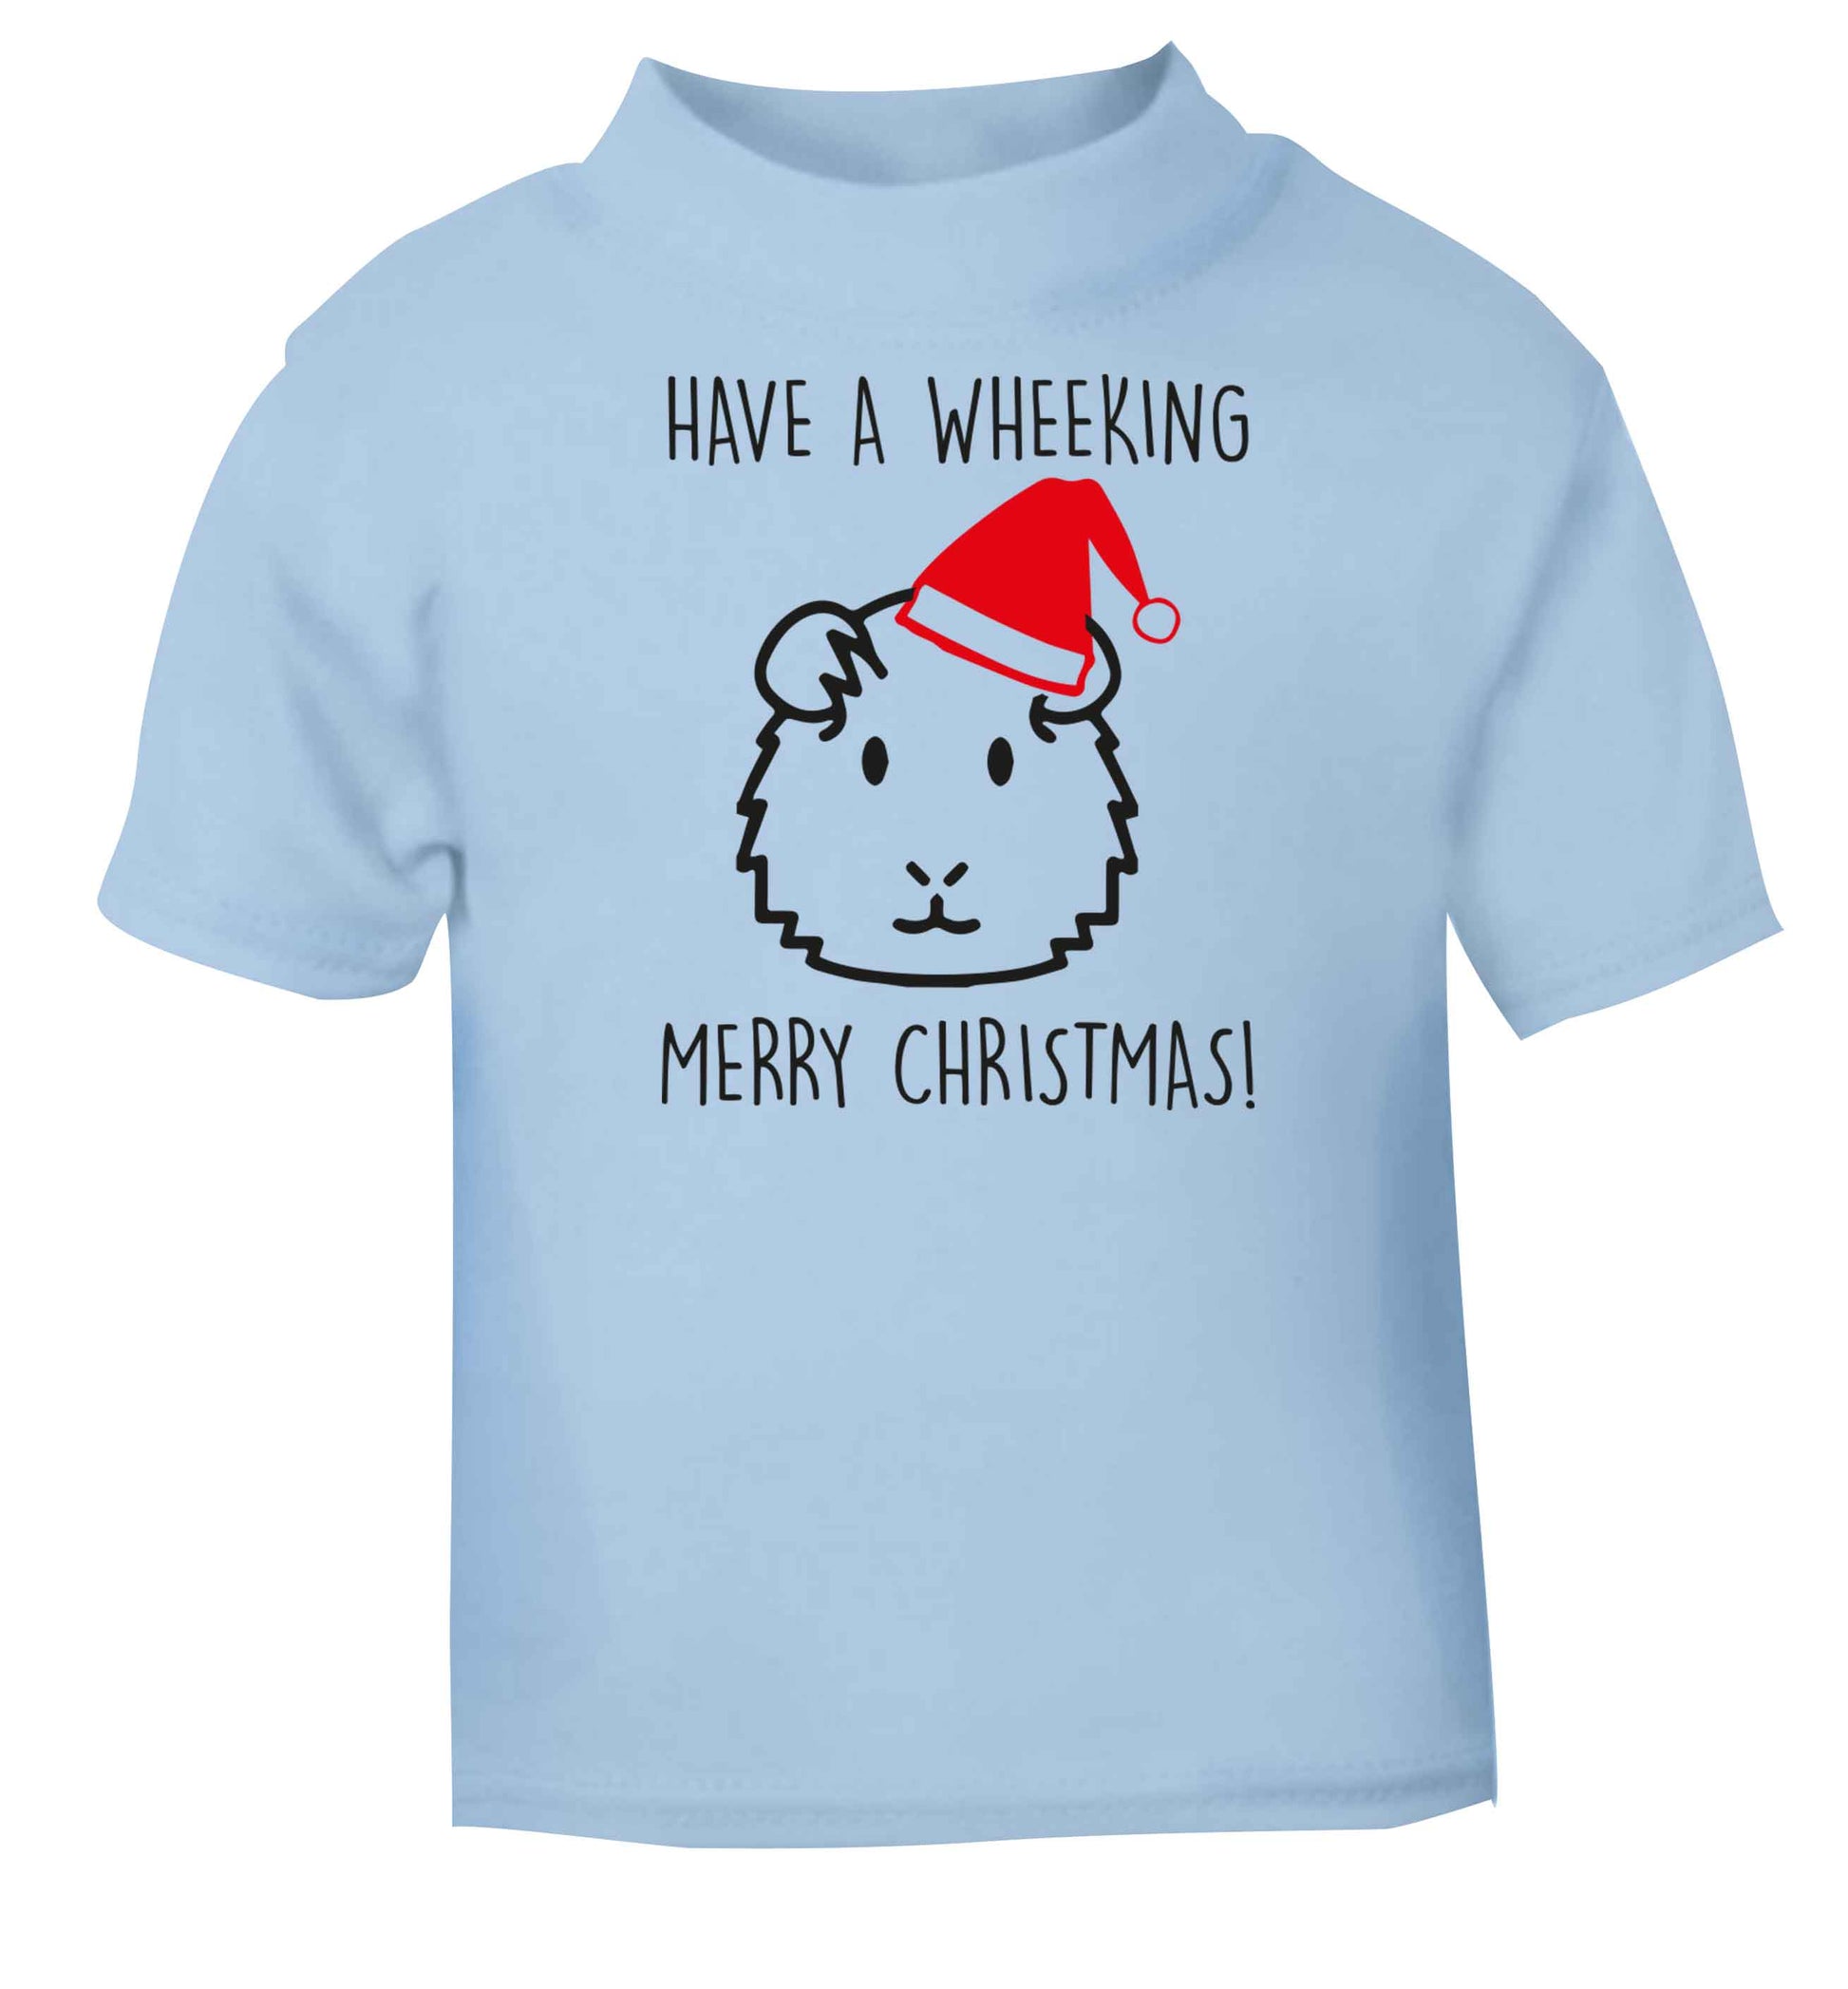 Have a wheeking merry Christmas light blue baby toddler Tshirt 2 Years